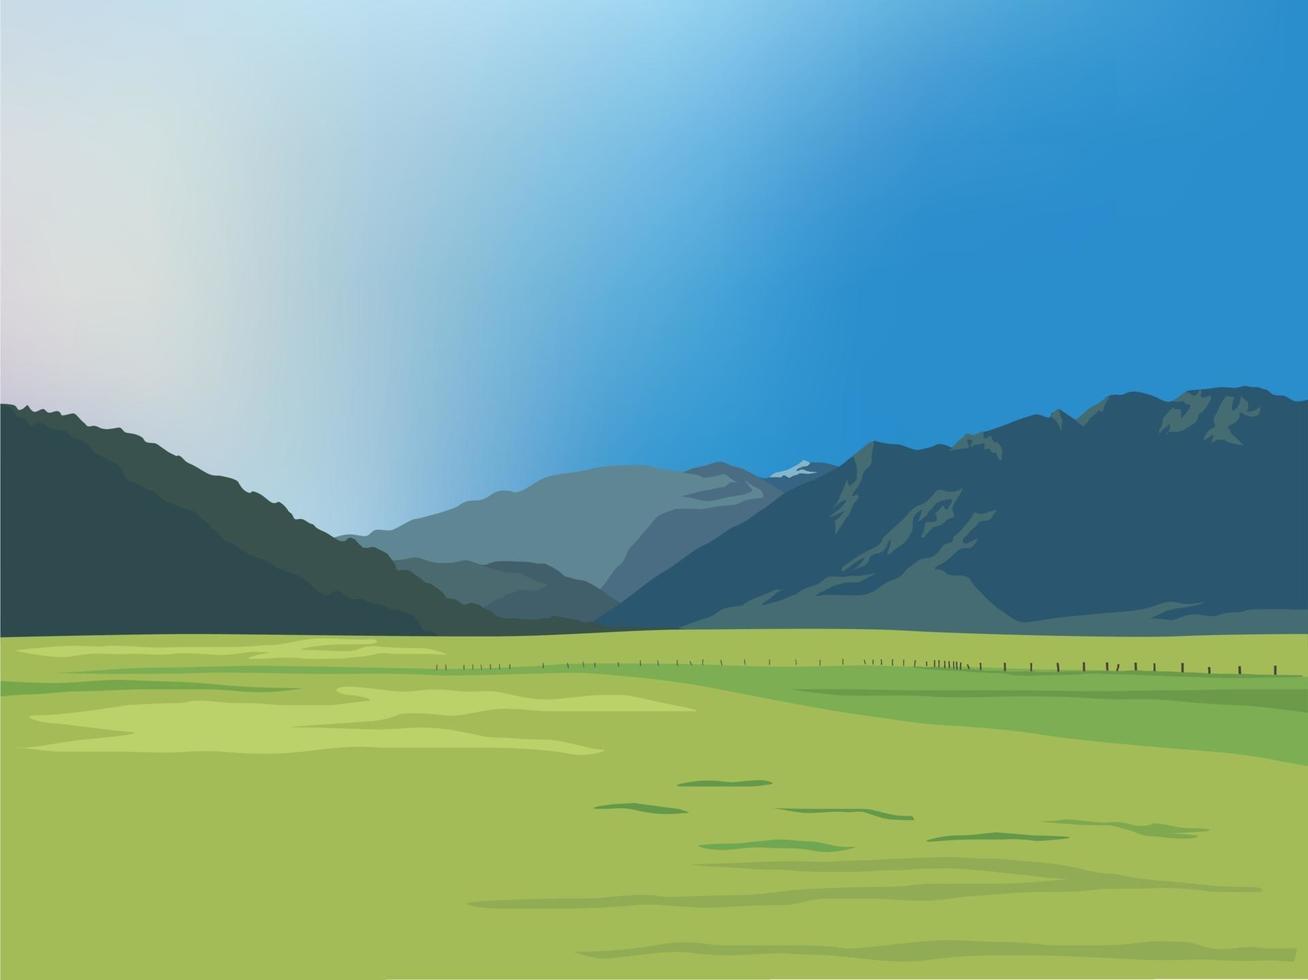 Mountain View and Beautiful Landscape on illustration graphic vector